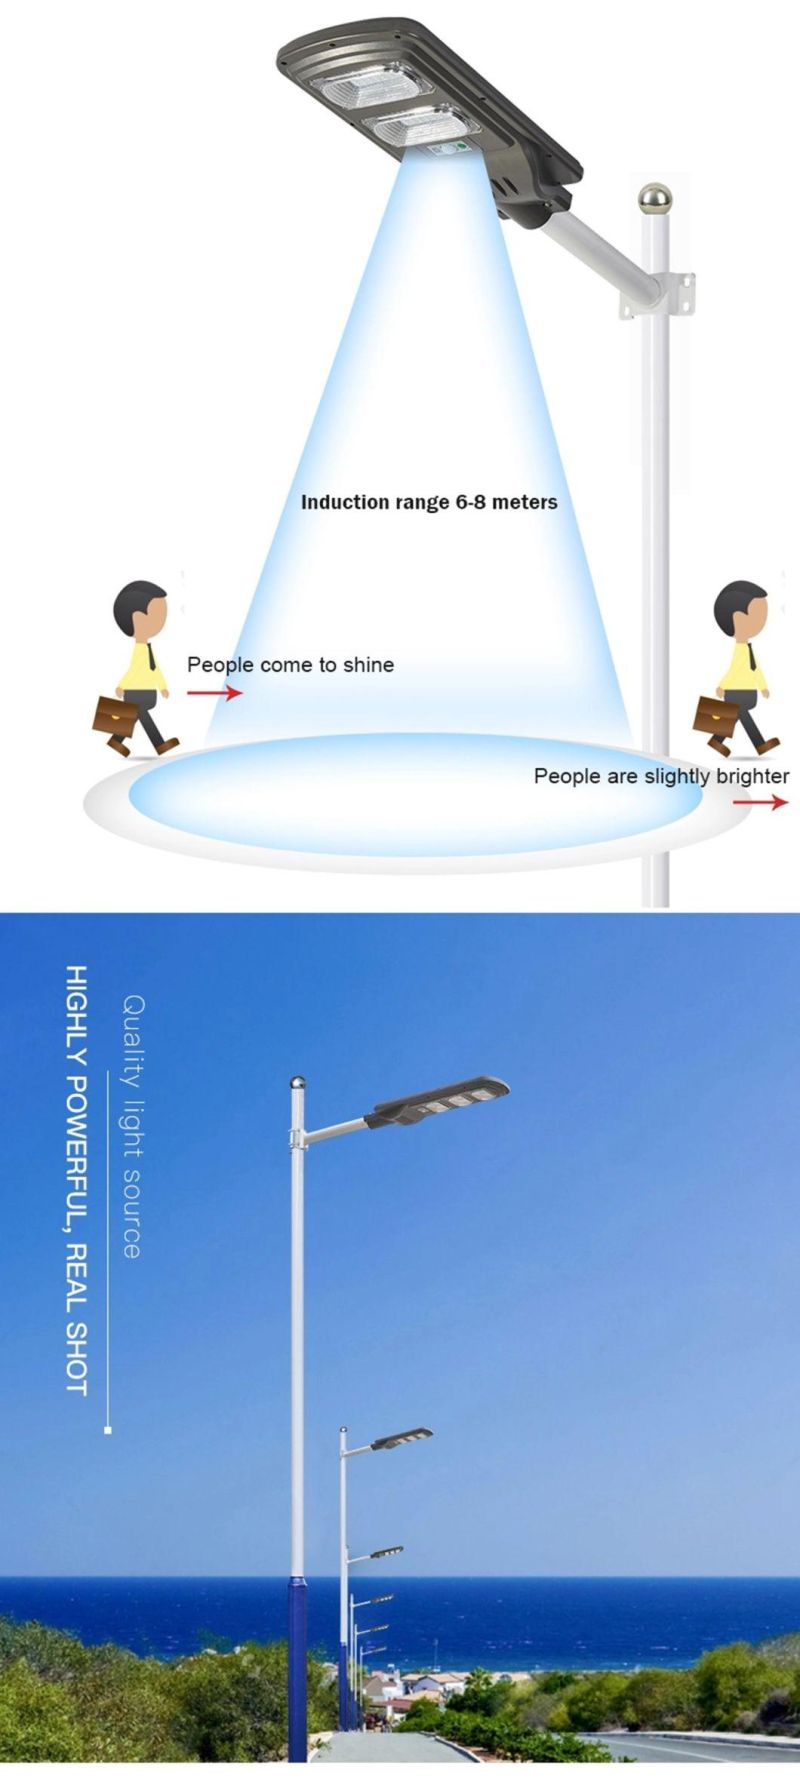 High Brightness Wide Coverage Waterproof Integrated LED All in One Solar Street Light